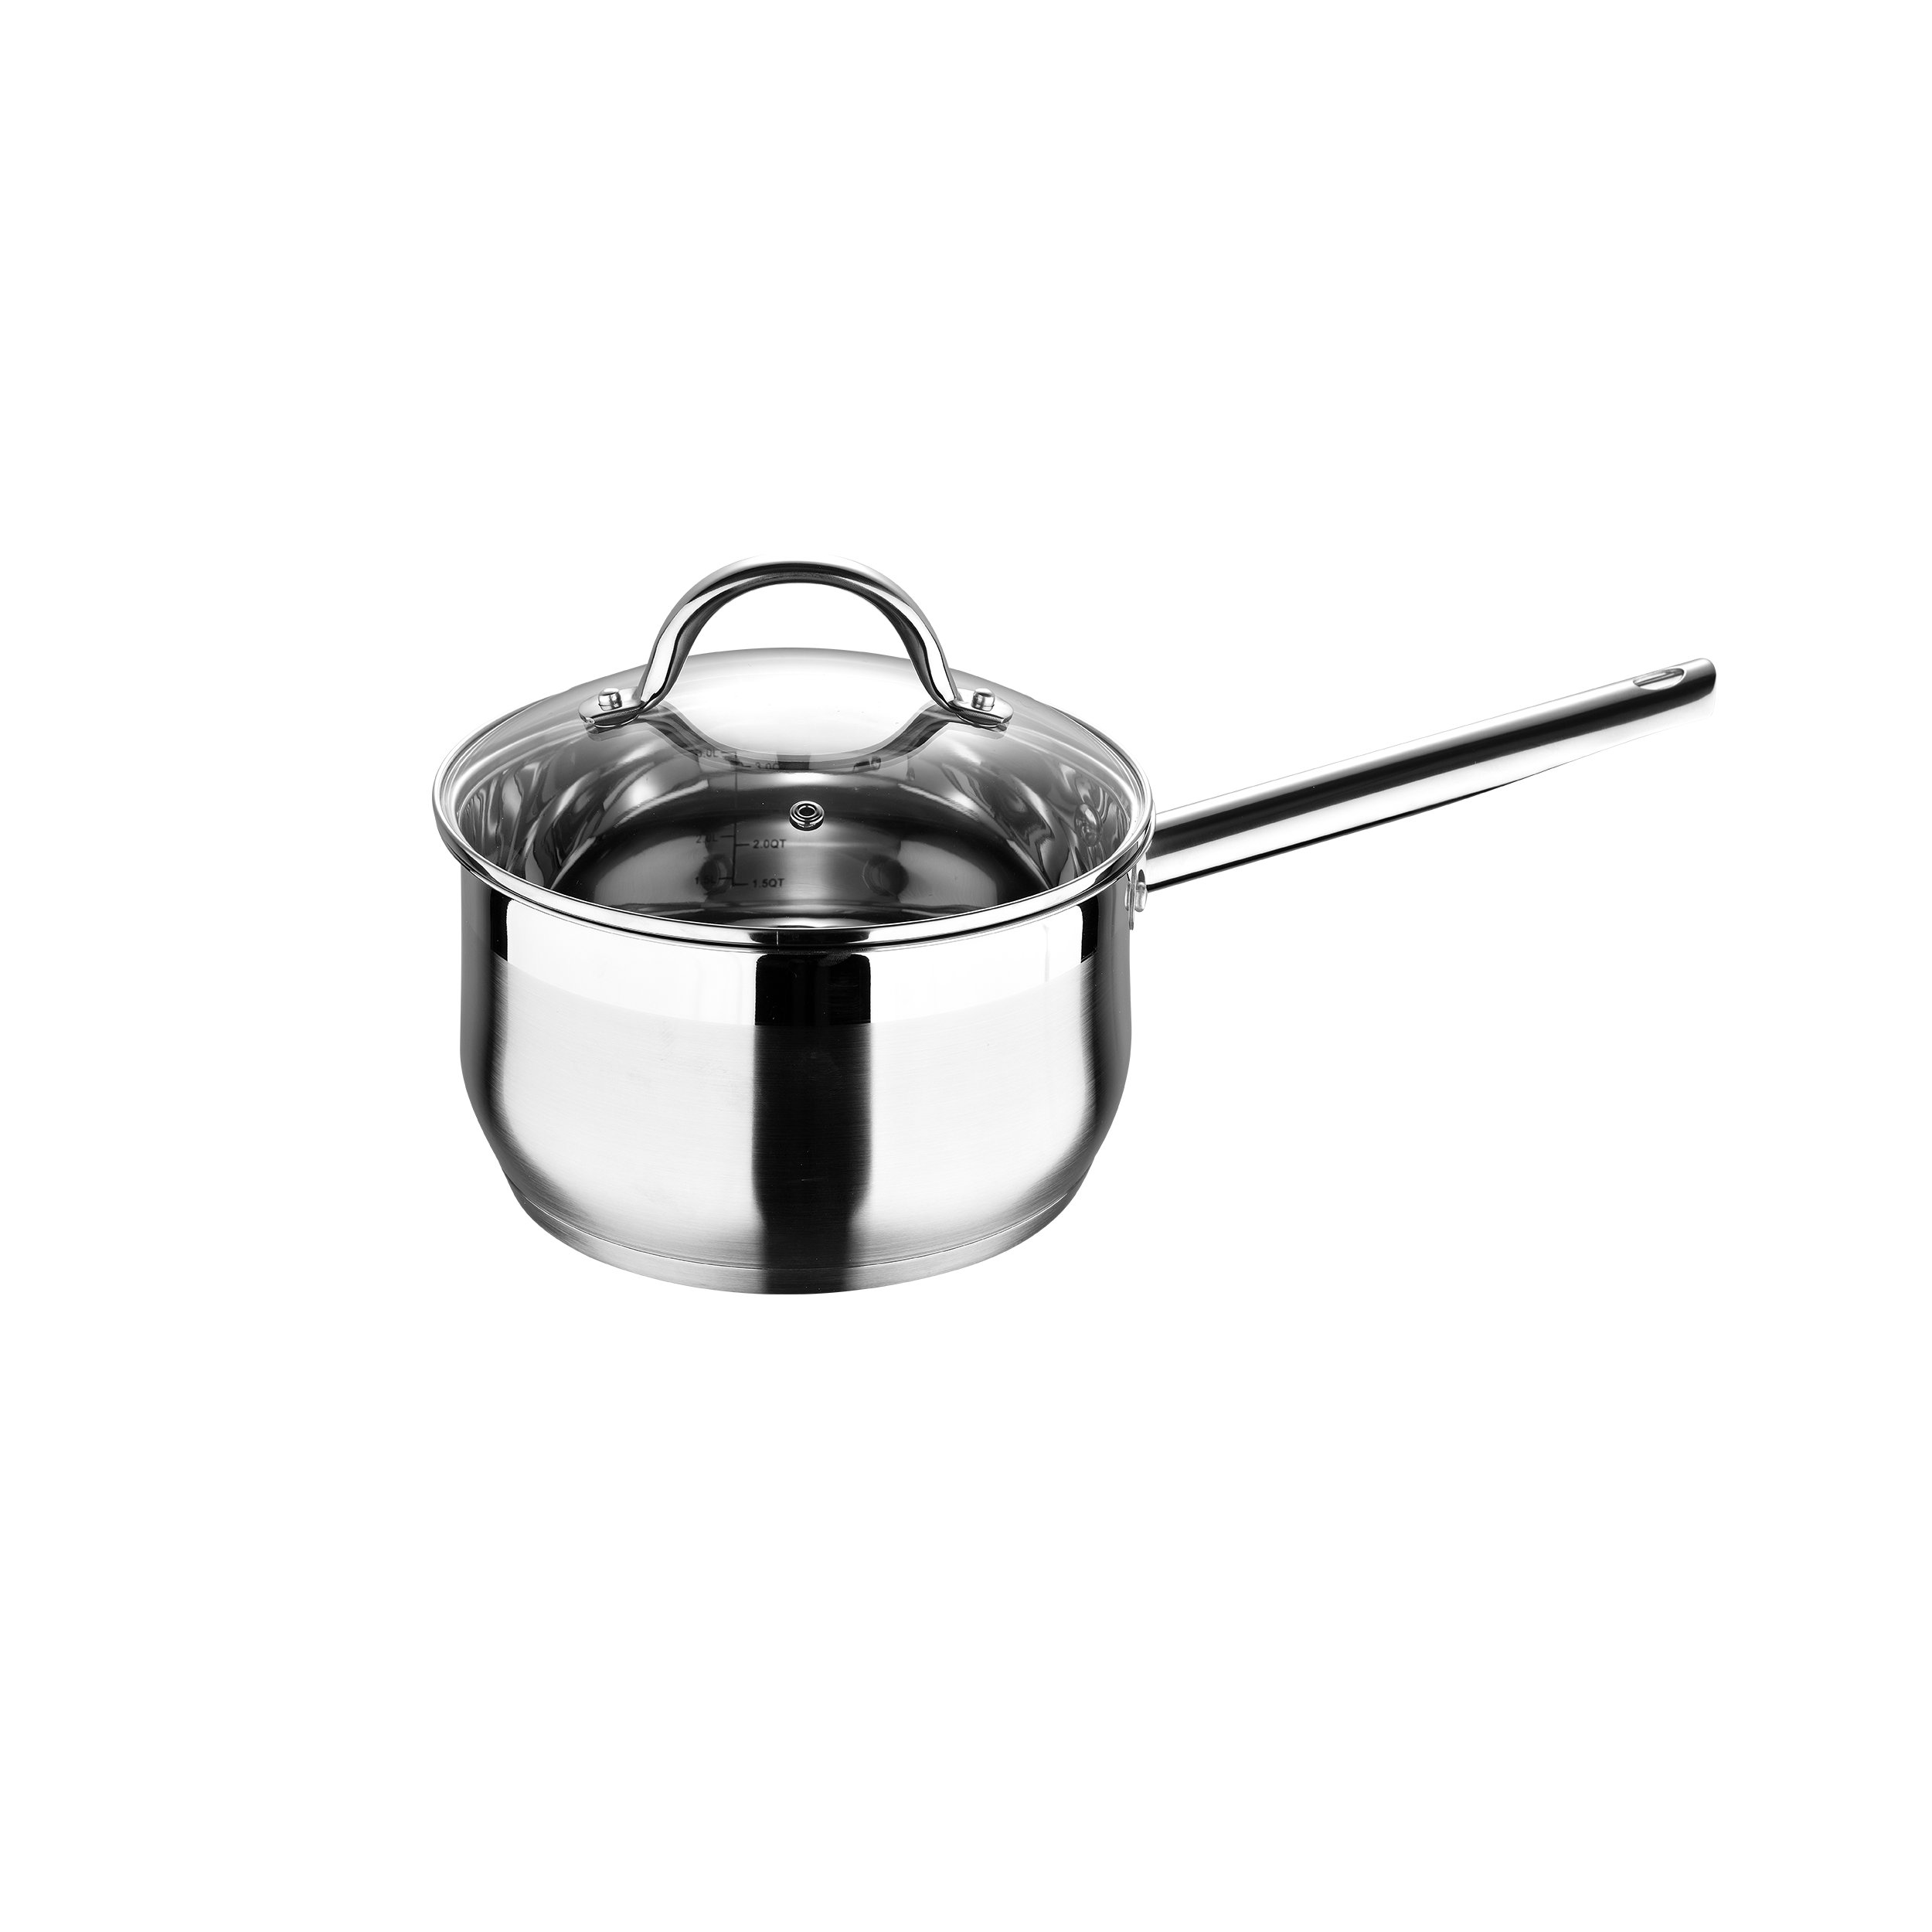 Classic™ Stainless Steel 3.5-Quart Sauce Pan with Cover